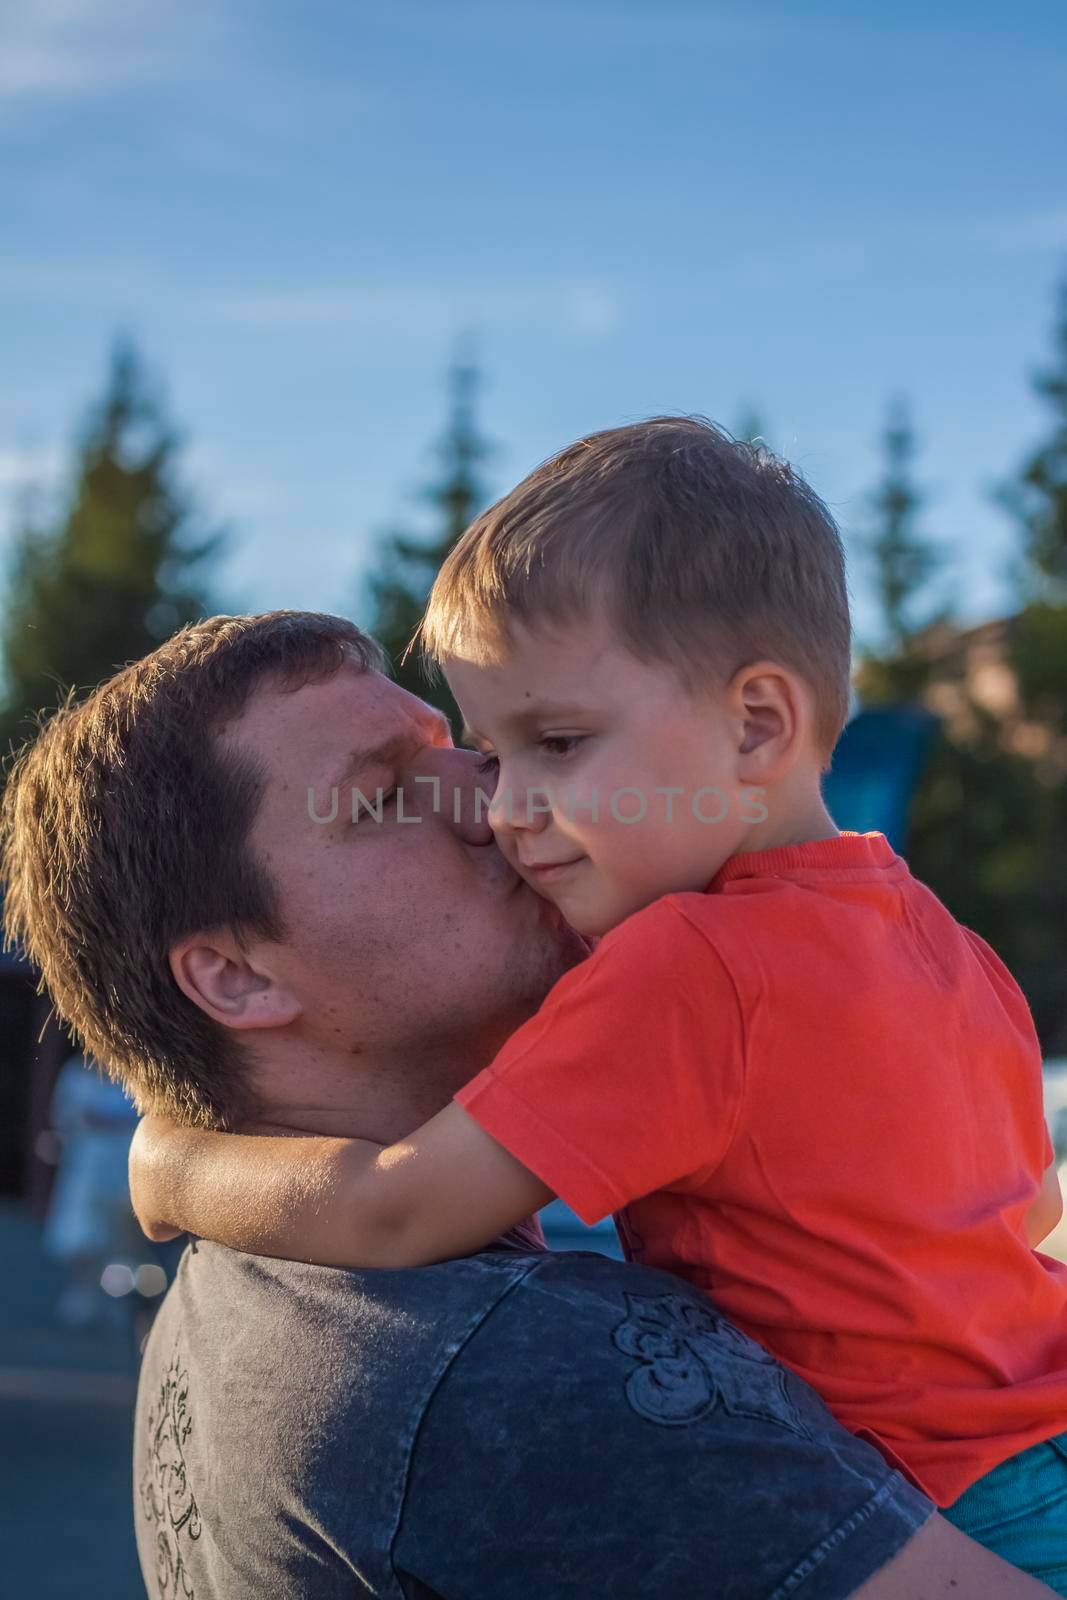 The father hugs and kisses his son on the cheek, whom he holds in his arms. Father and son. Family